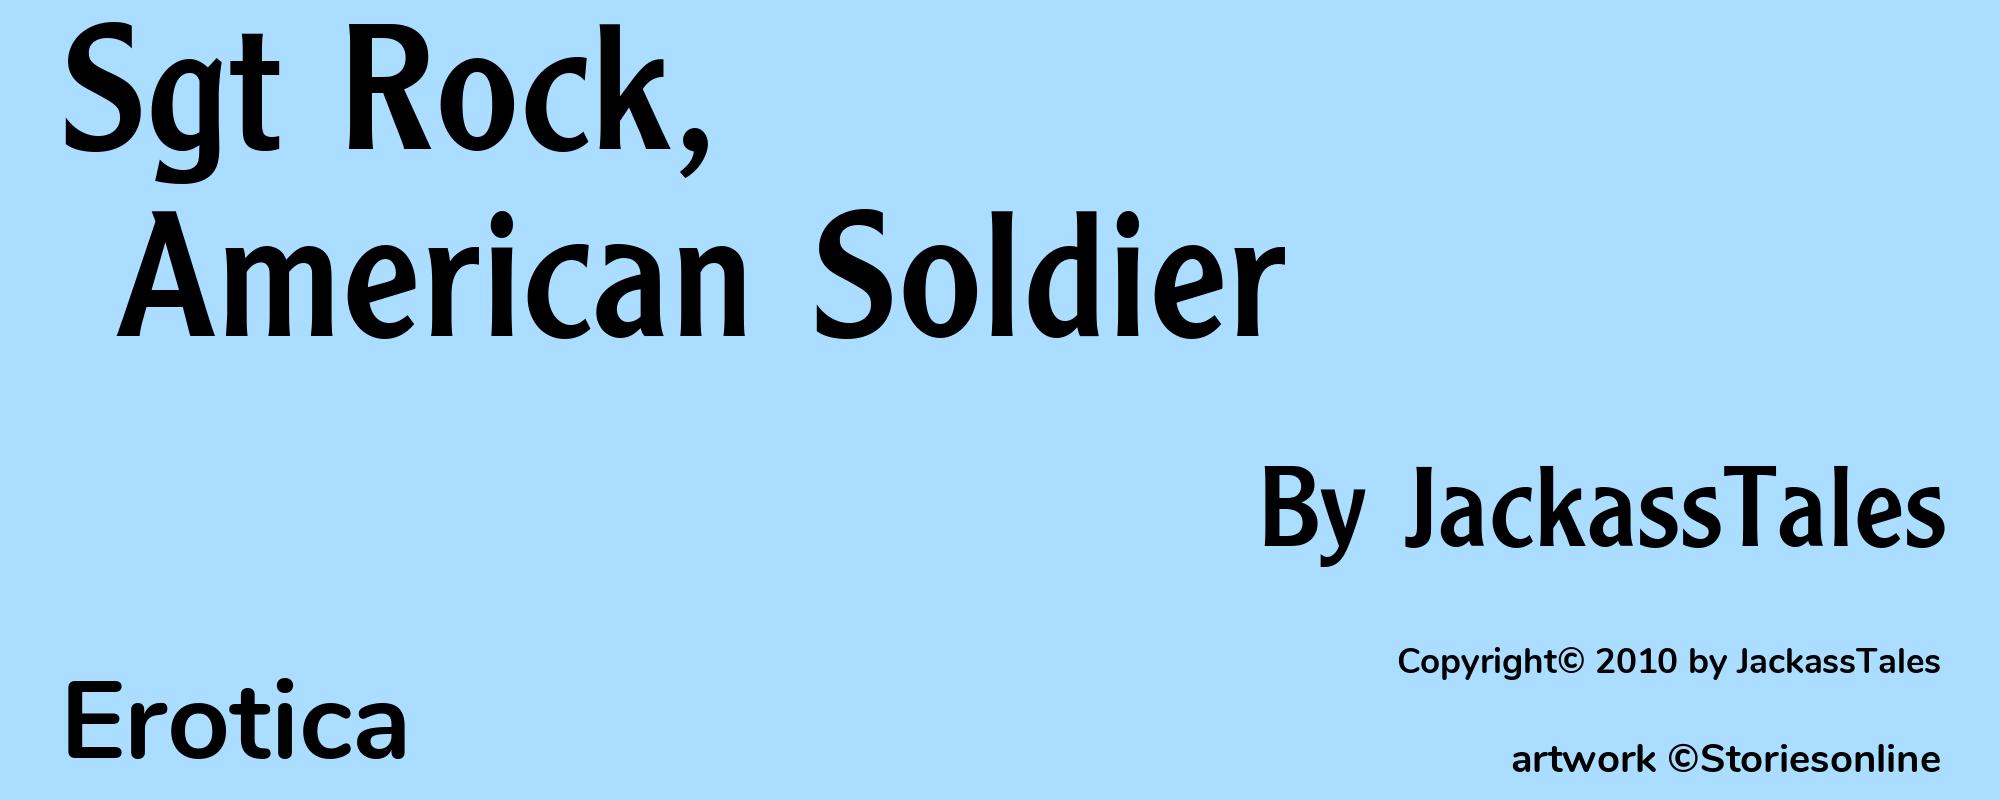 Sgt Rock, American Soldier - Cover